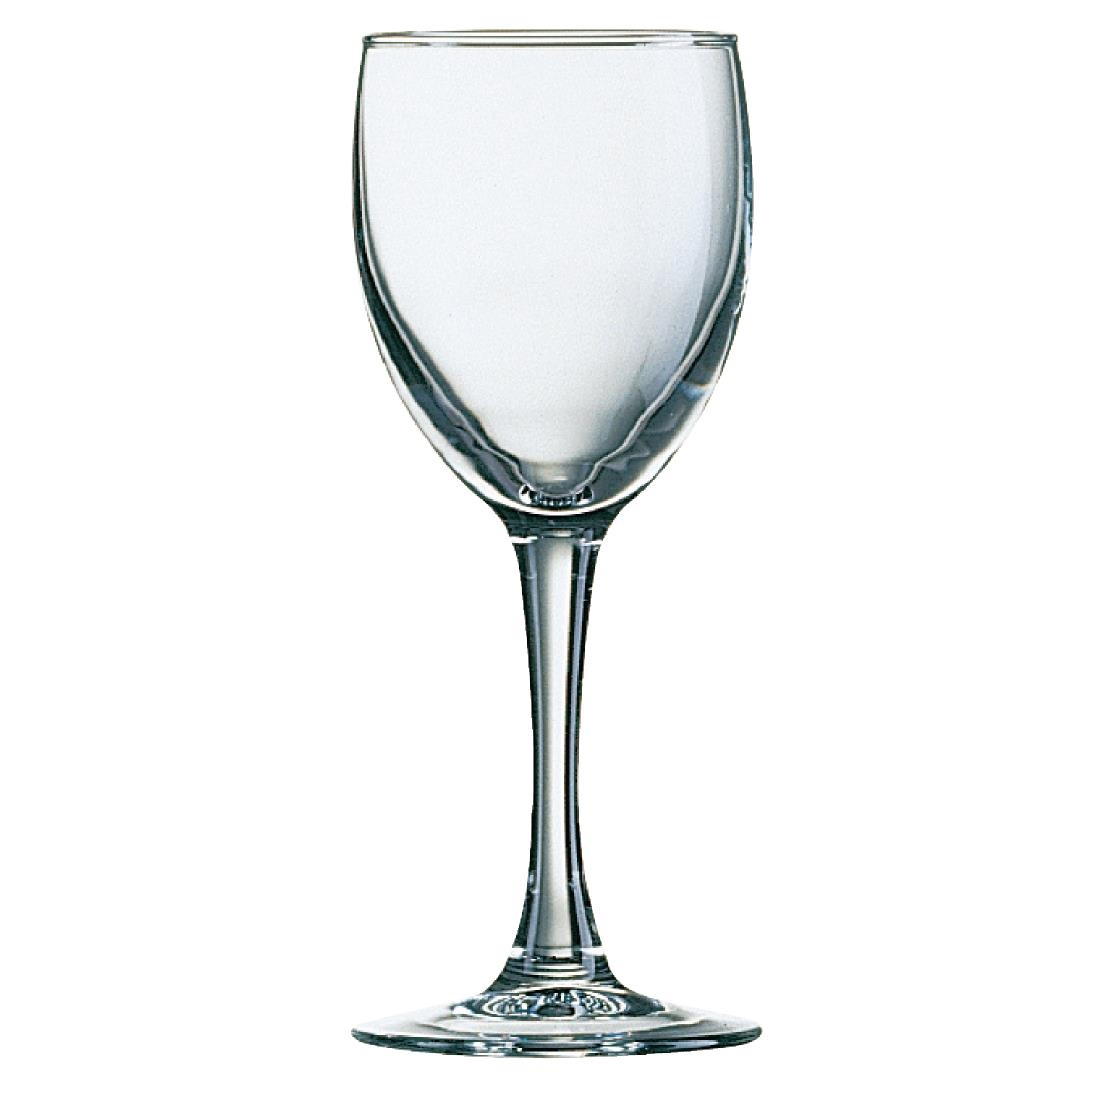 Arcoroc Princesa Wine Glasses 230ml CE Marked at 175ml (Pack of 48)